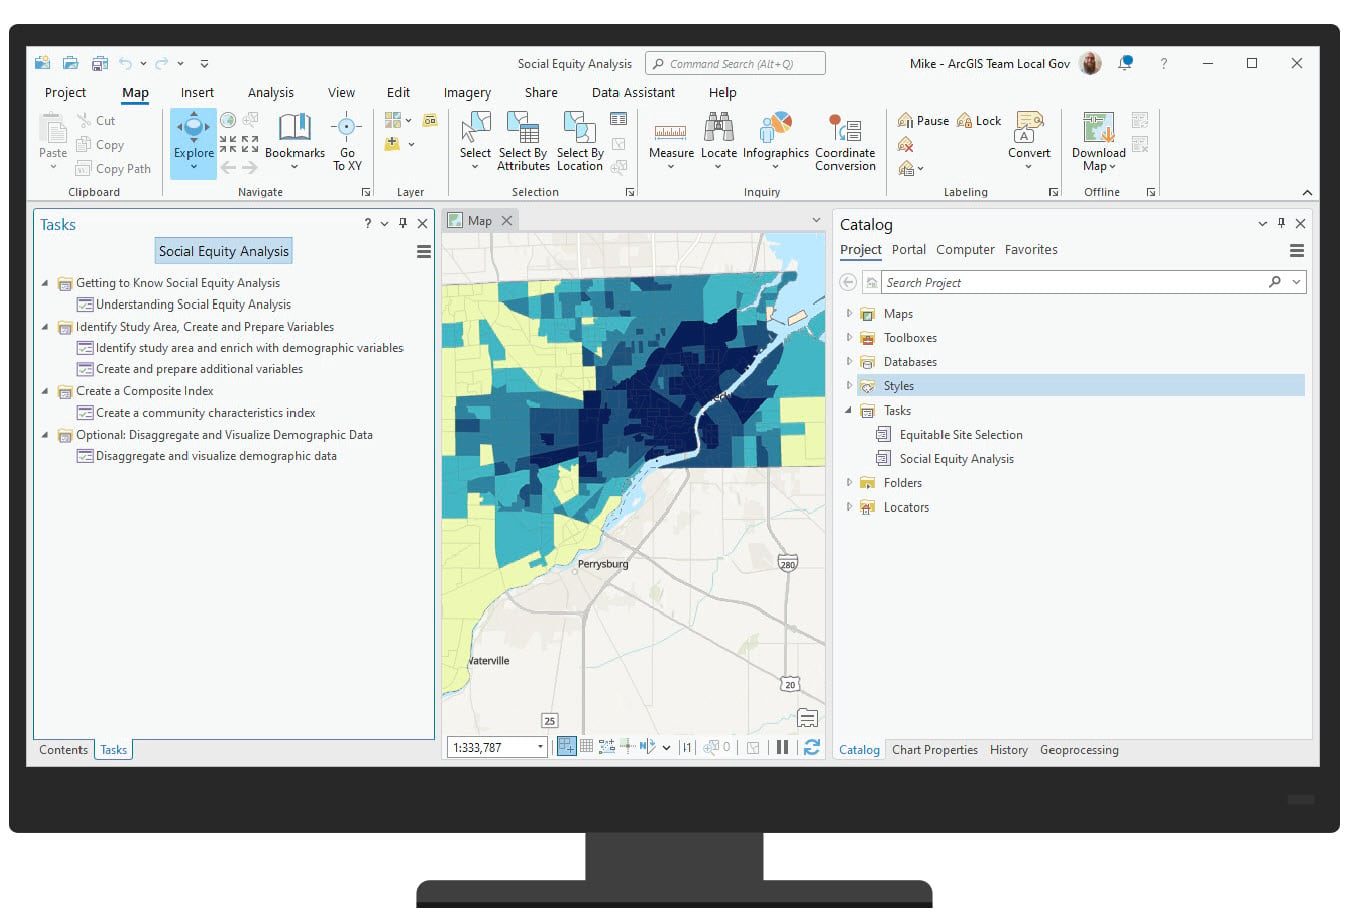 An image of the Social Equity Analysis ArcGIS Pro project with tasks open